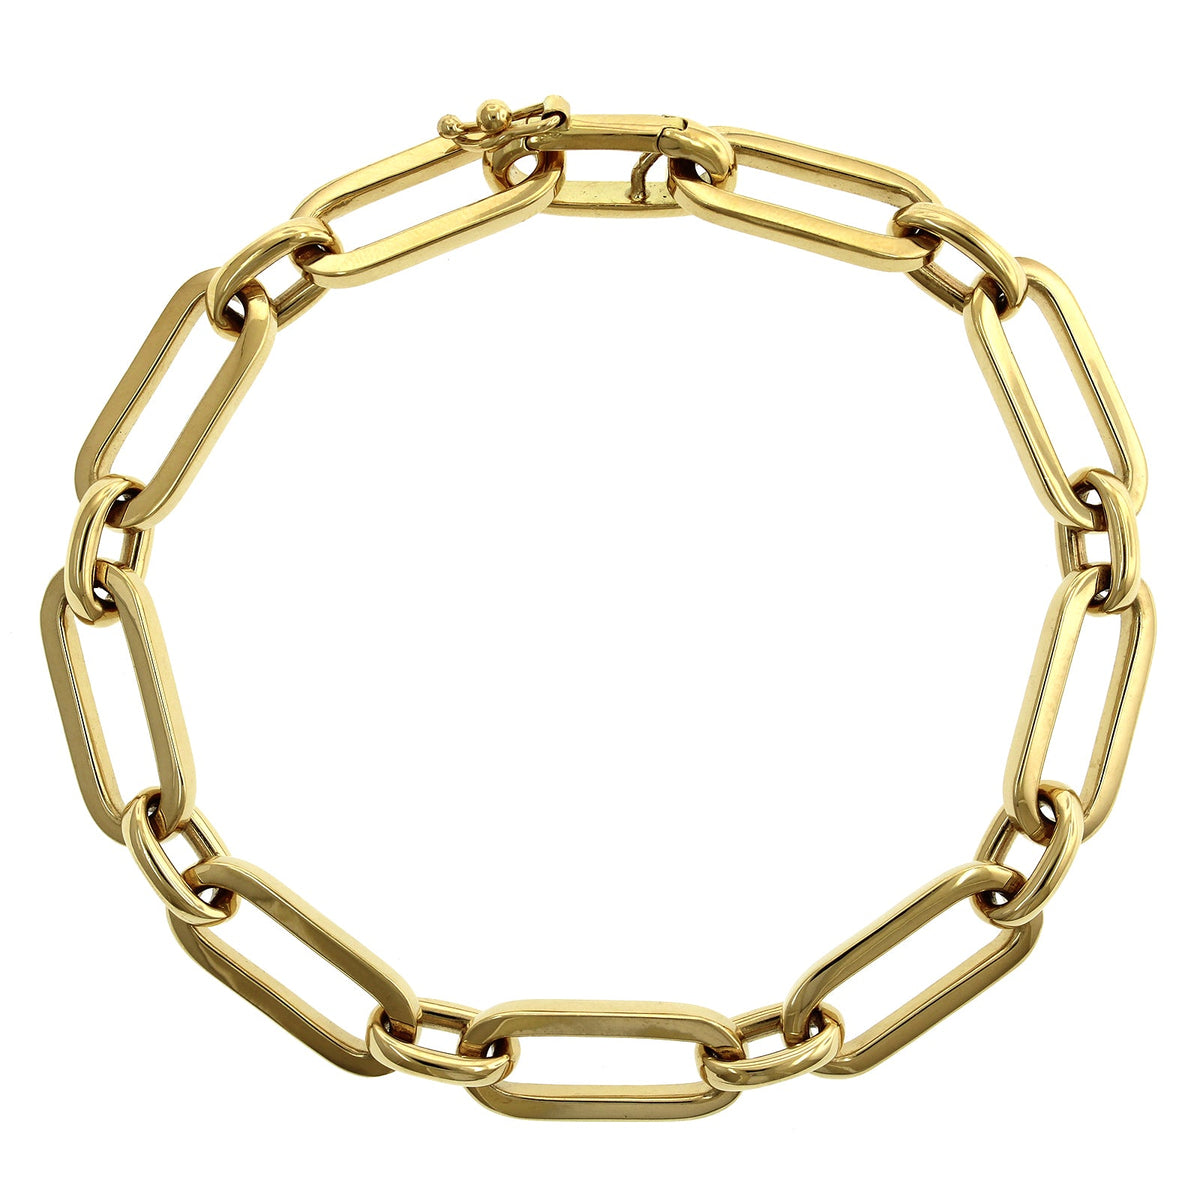 18K Yellow Gold Square Link Bracelet, 18k yellow gold, Long's Jewelers